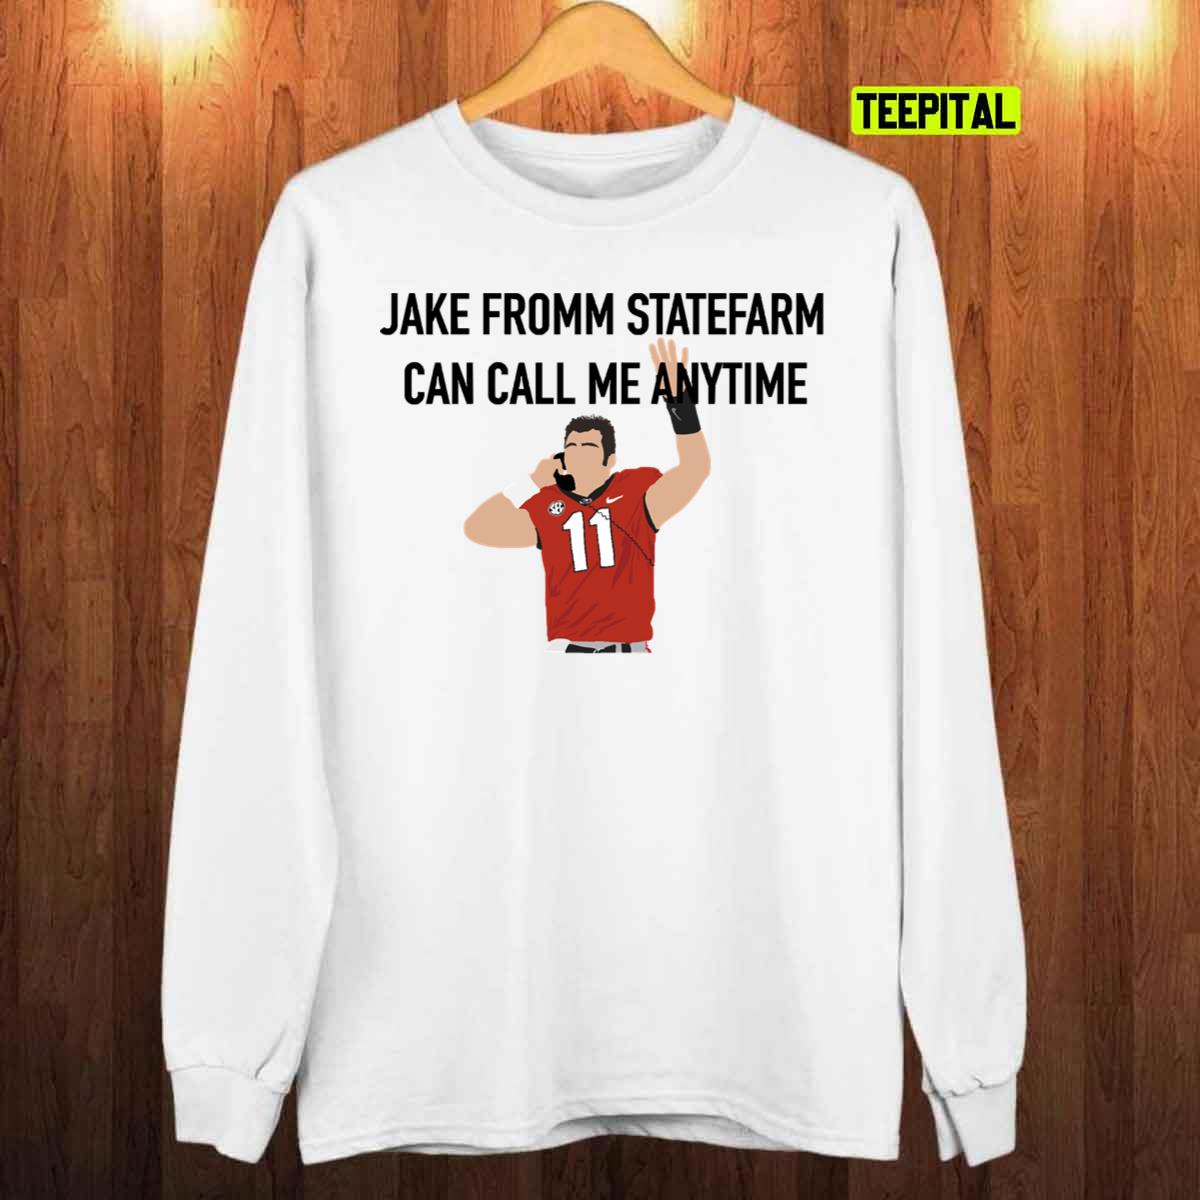 Jake Fromm State Farm T-Shirt